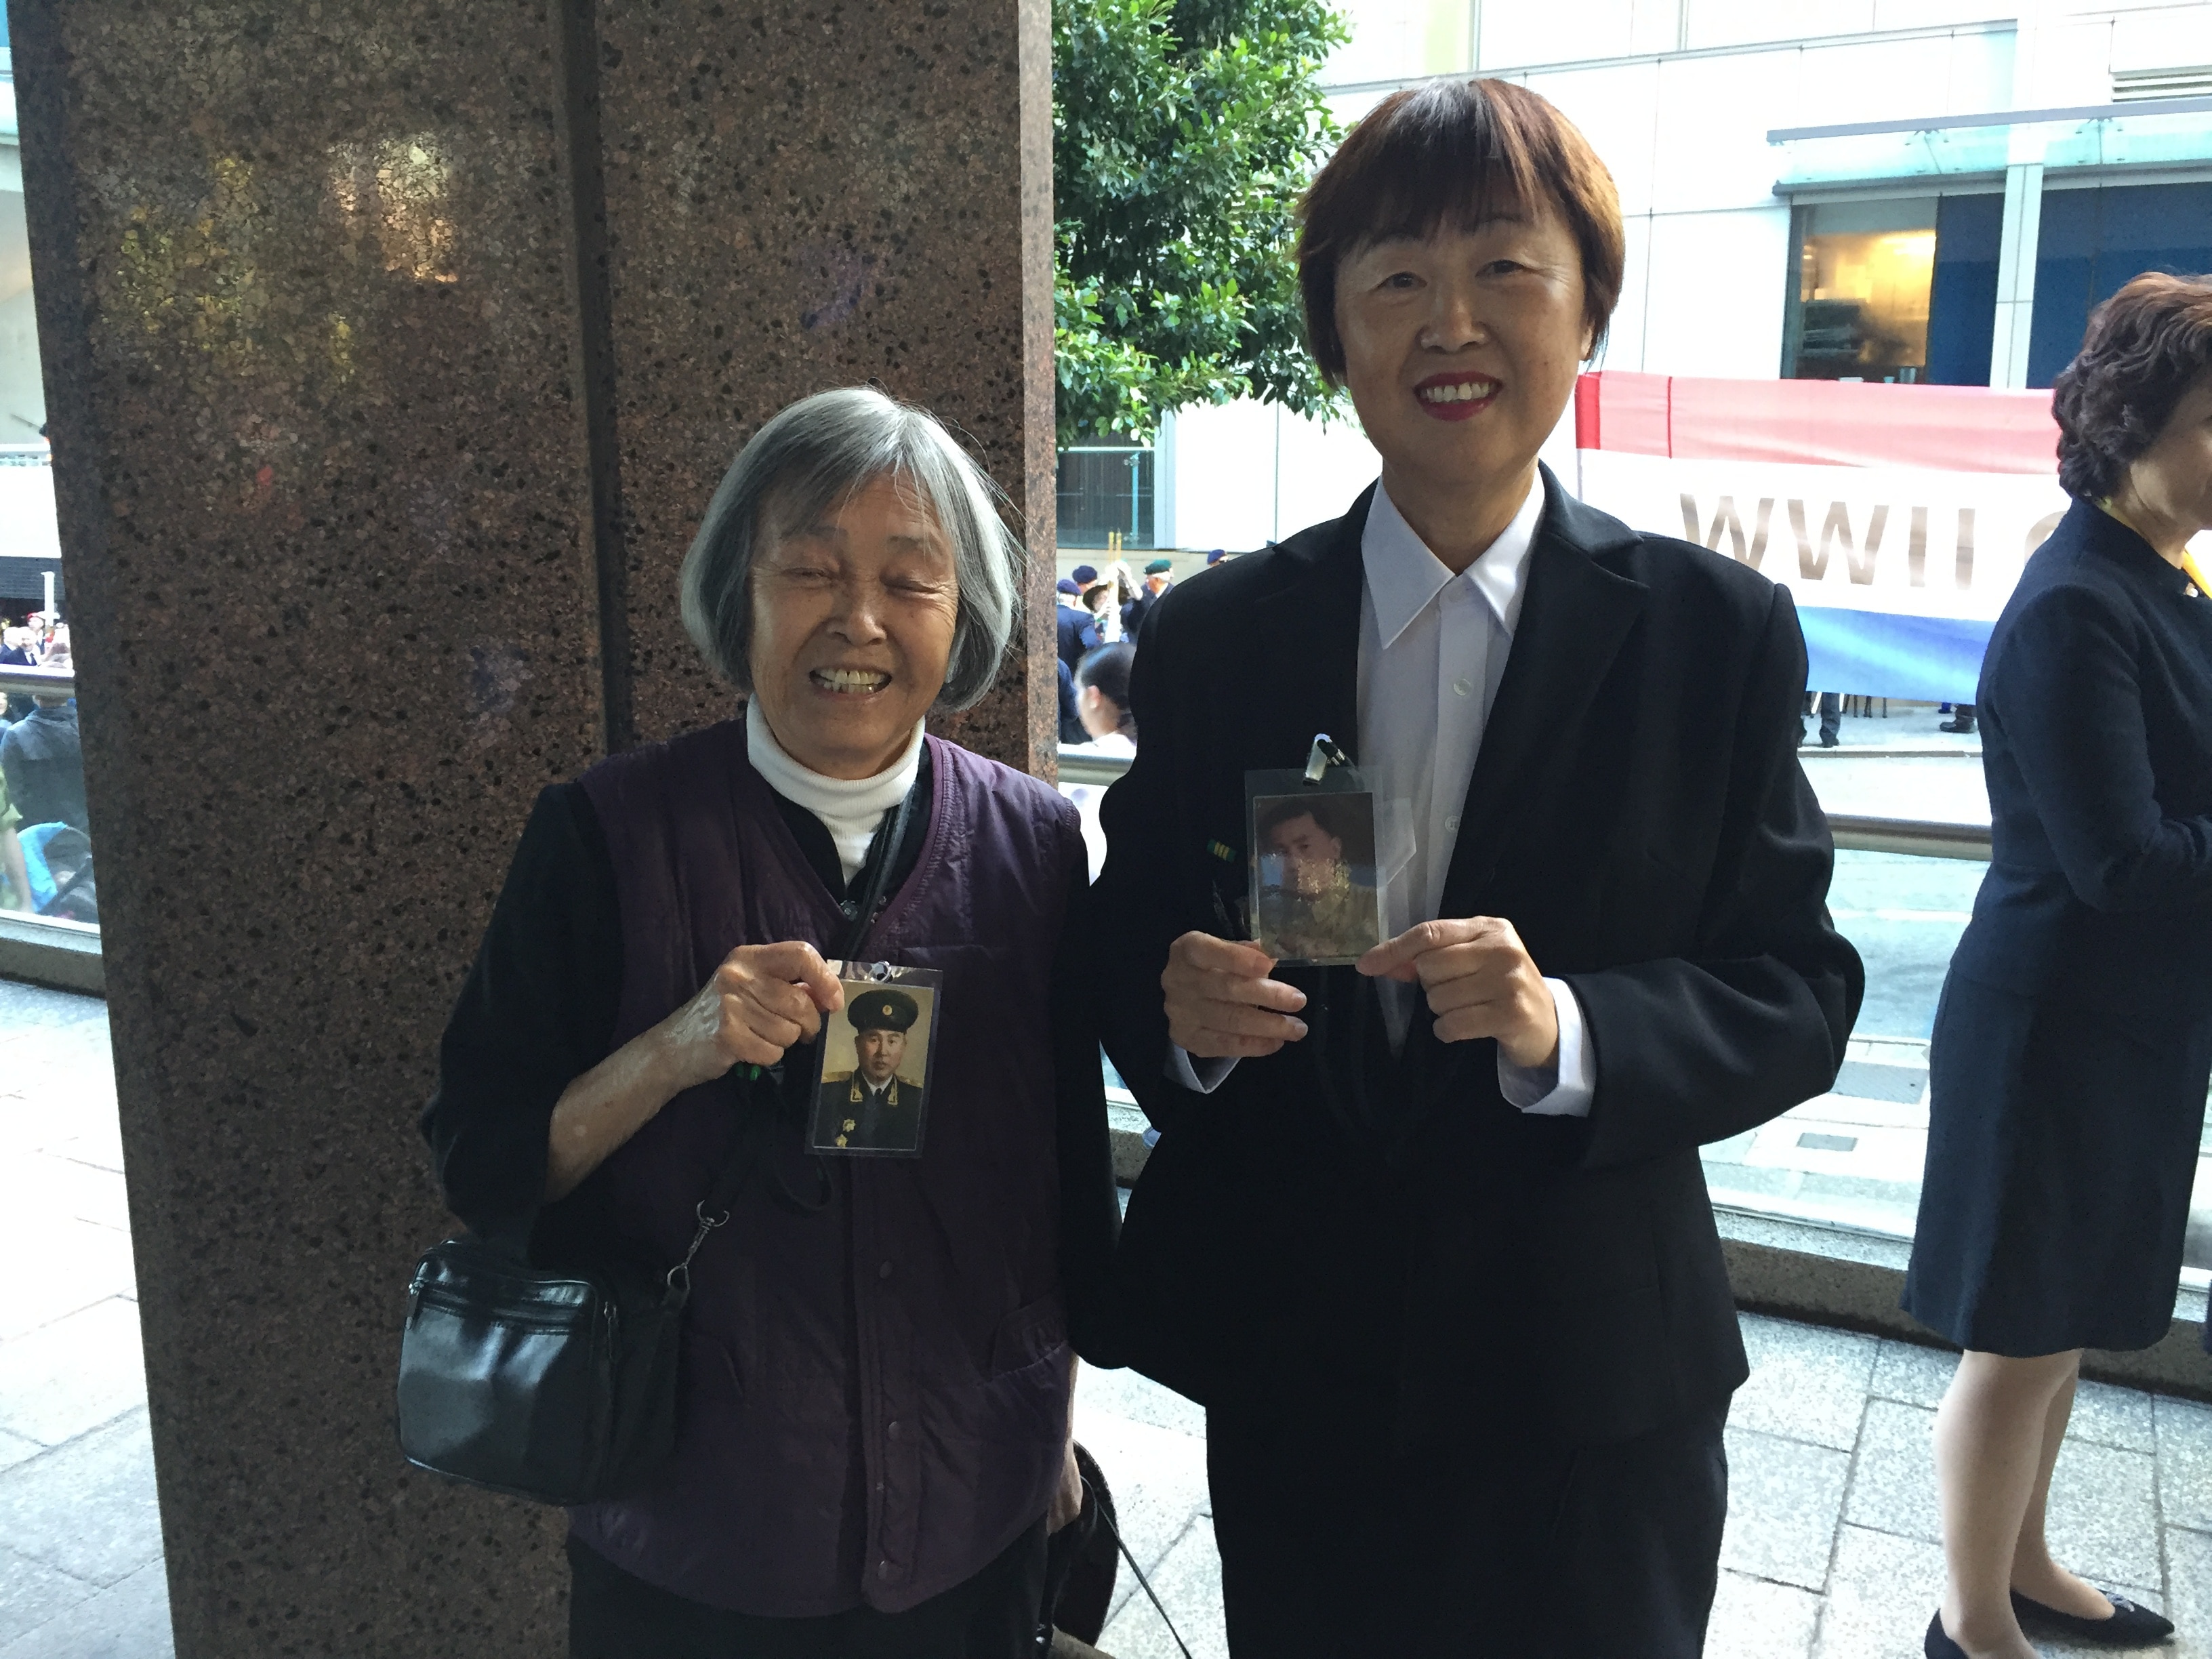 Mary (R) and her mother, Shu Qin Lu (L), with photos of her father Lie Yu.